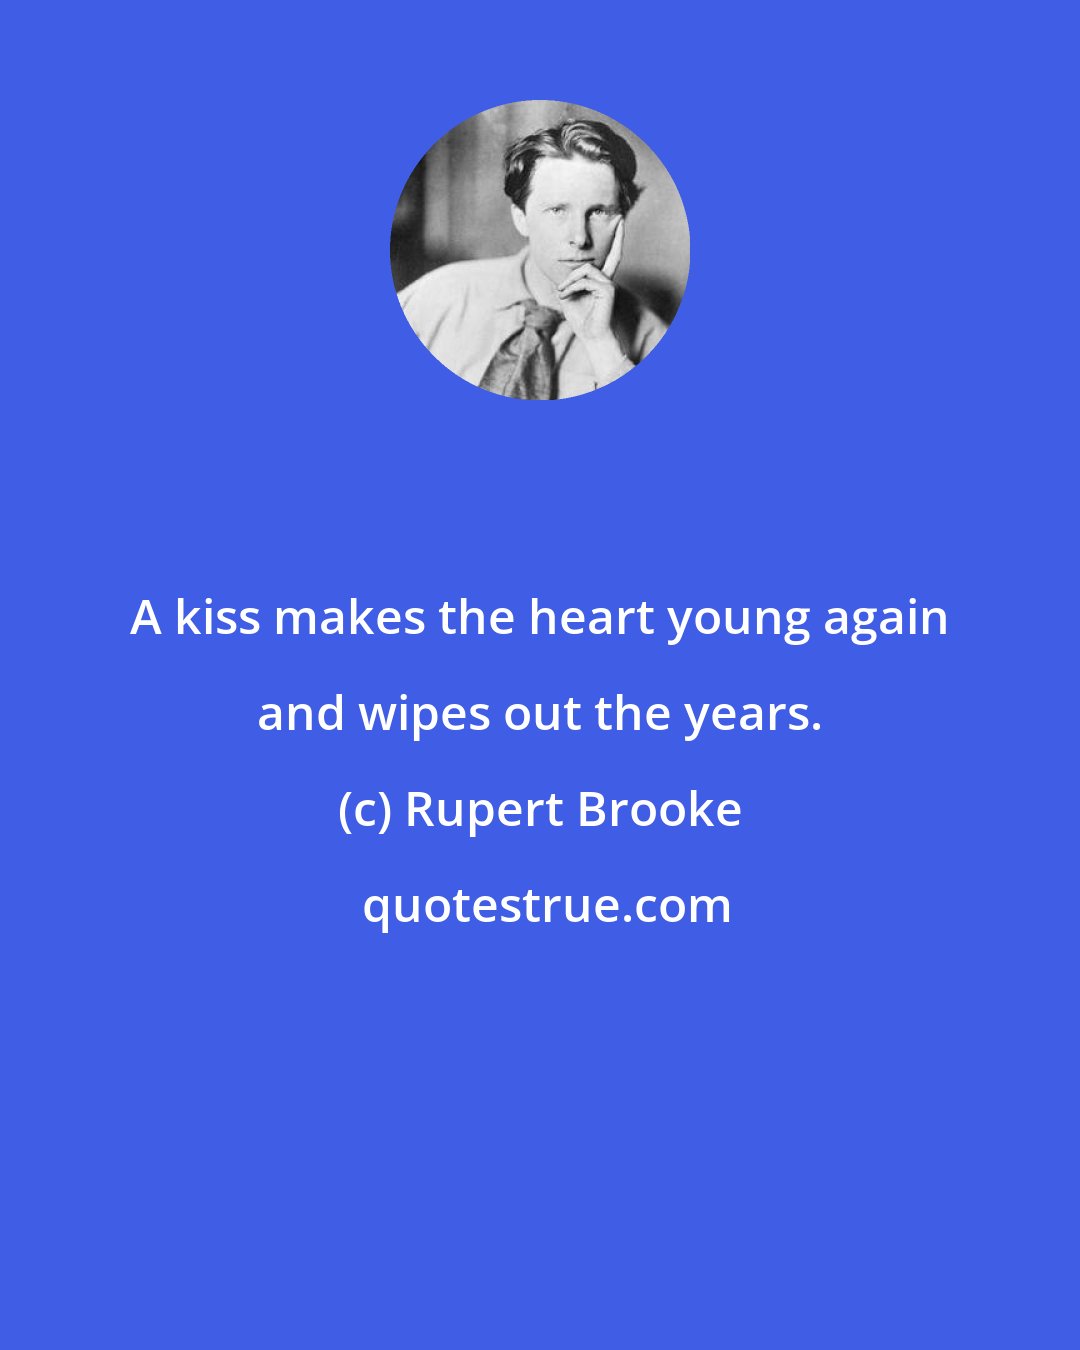 Rupert Brooke: A kiss makes the heart young again and wipes out the years.